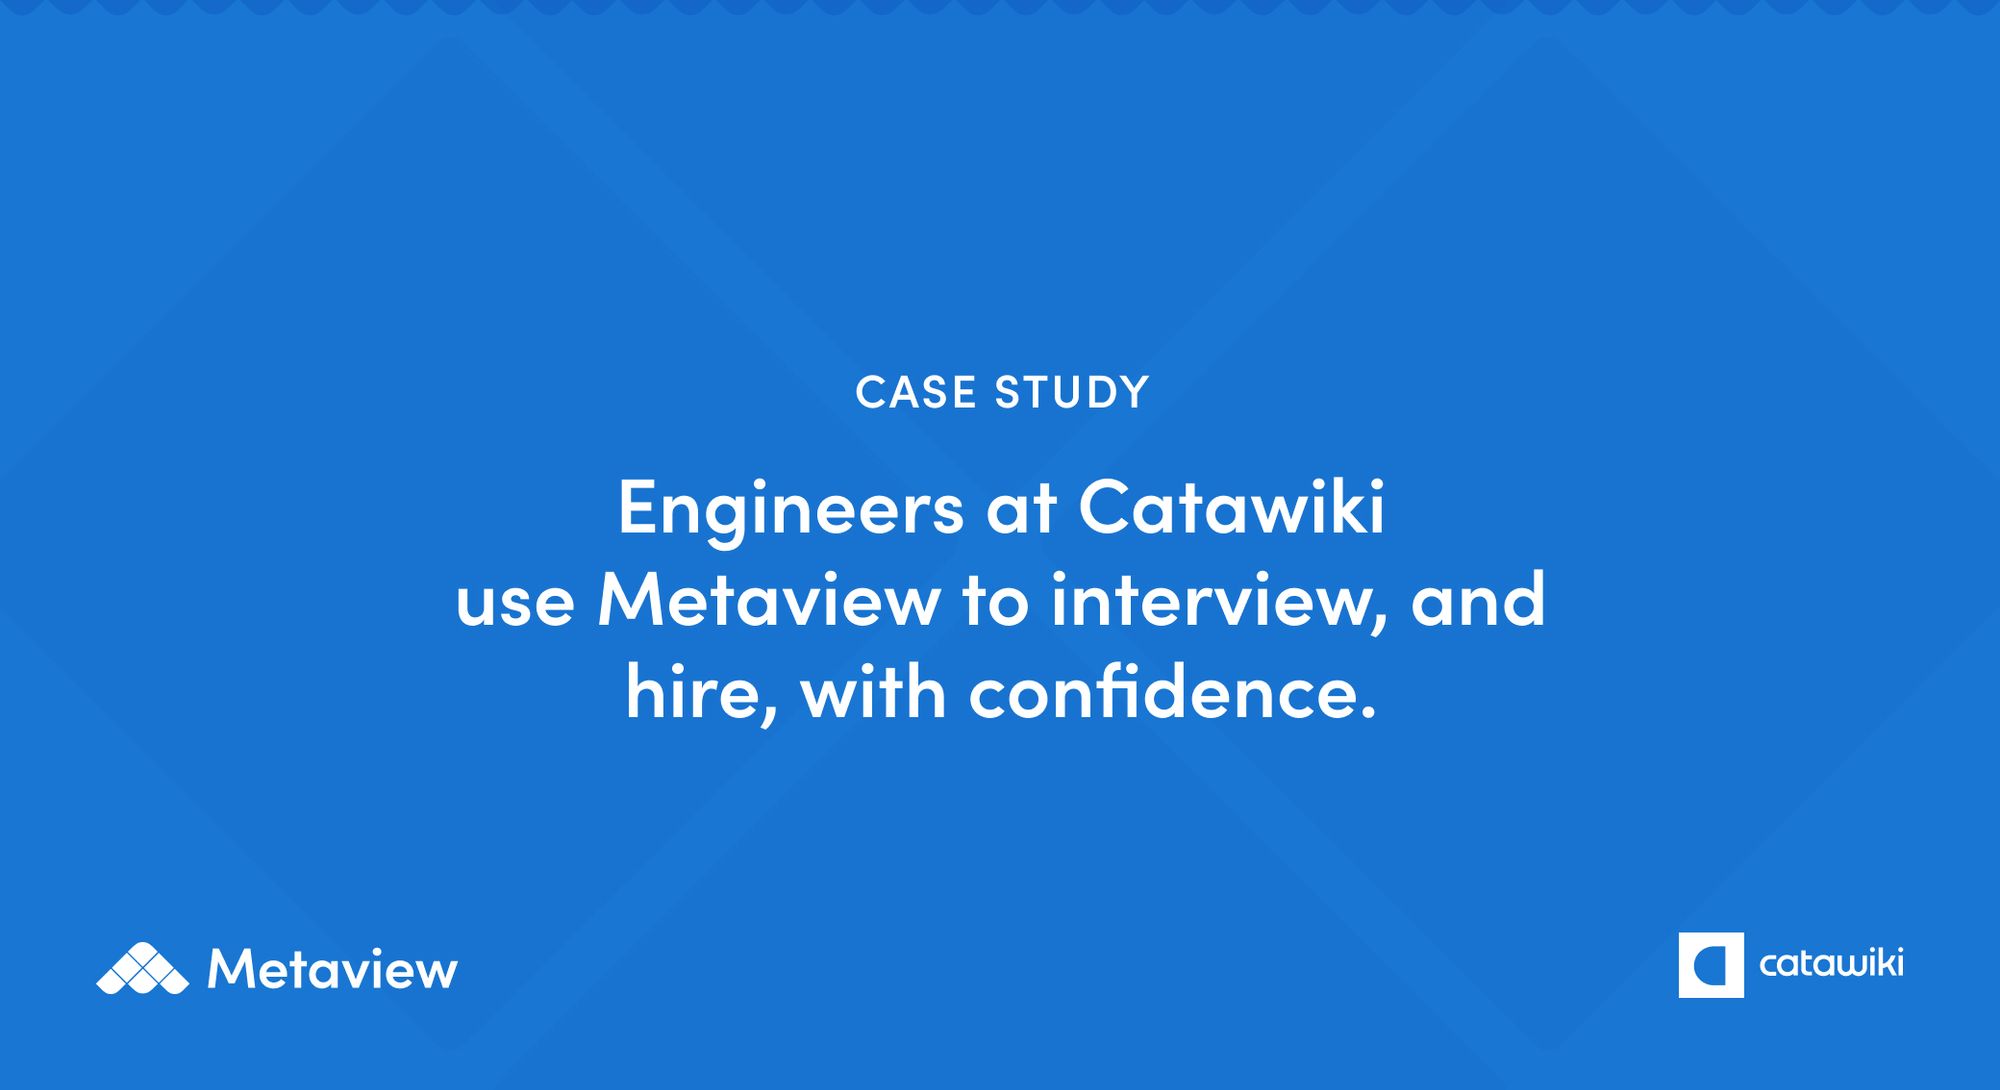 Engineers at Catawiki use Metaview to interview, and hire, with confidence.